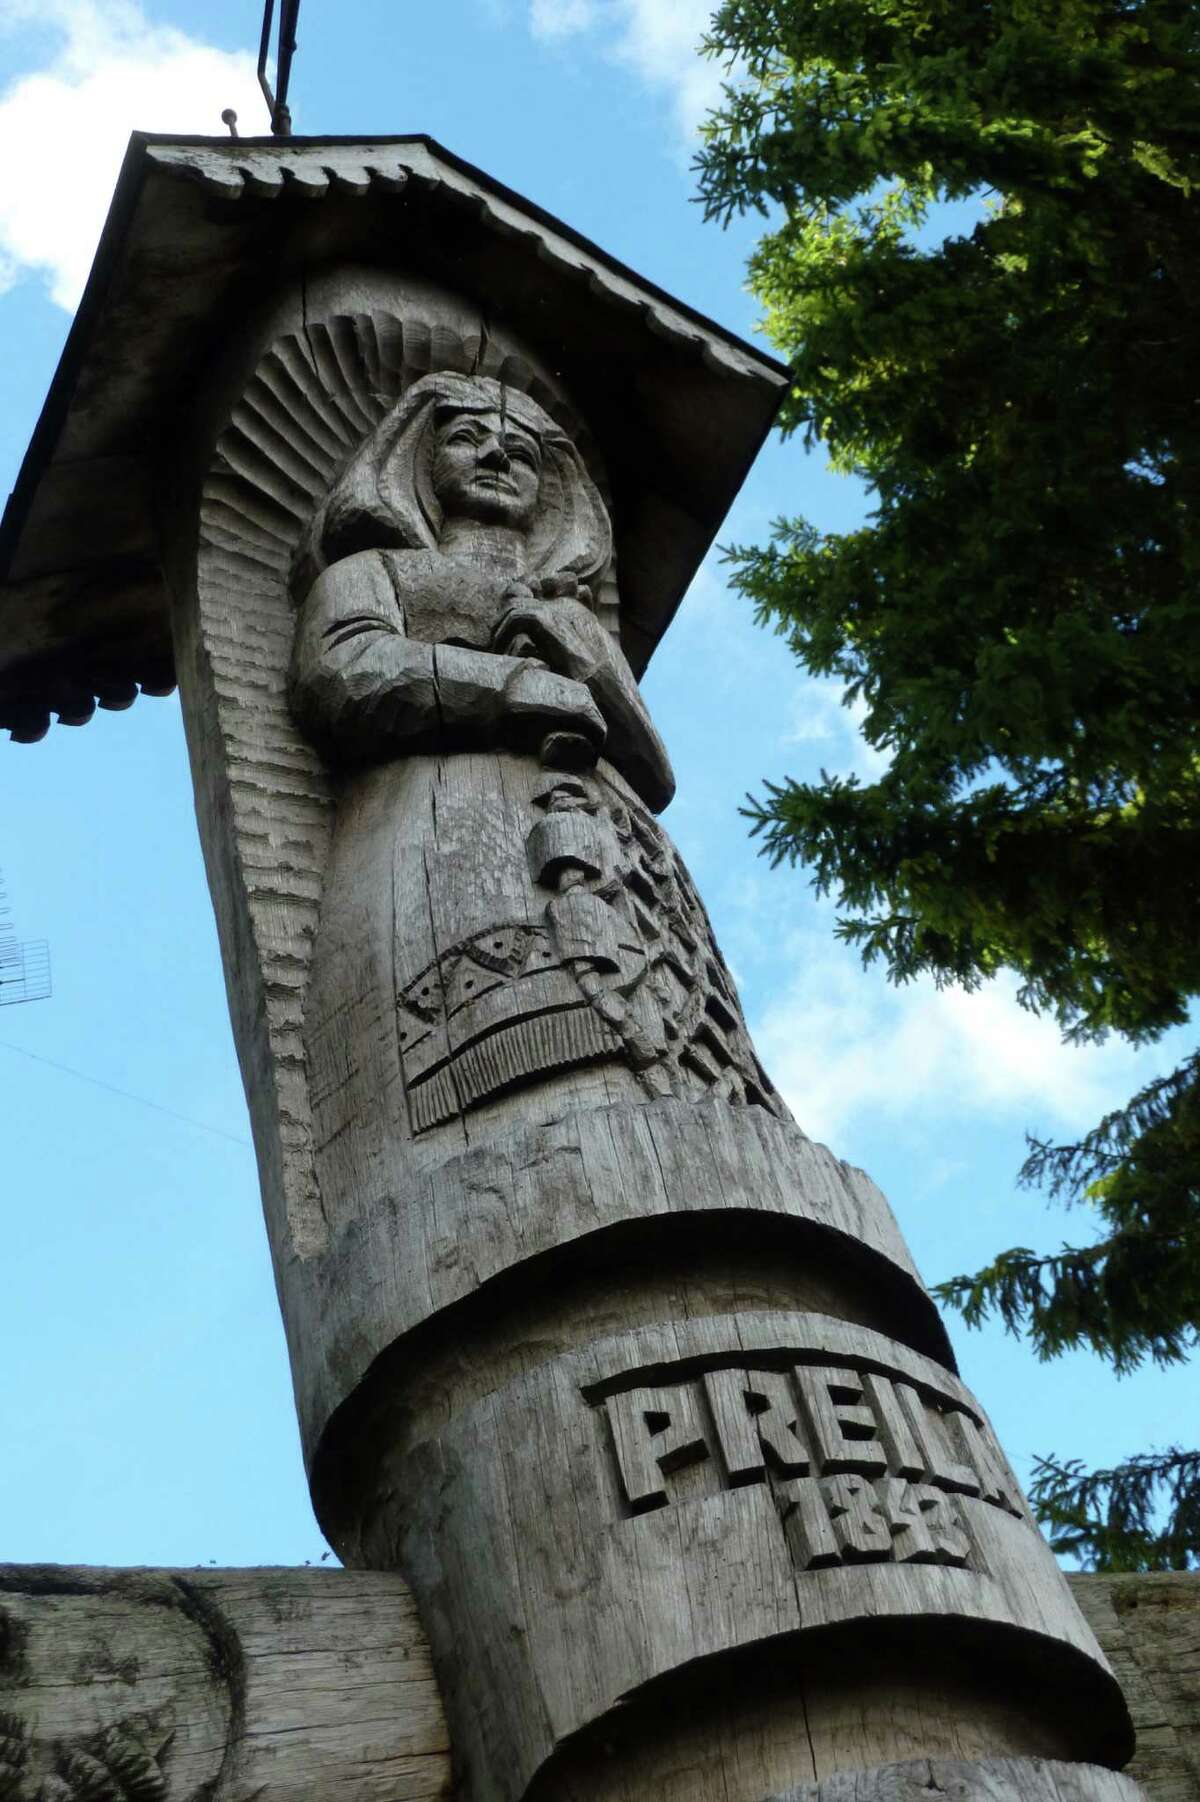 In the artist colony of Juodkrante, generations of woodworkers have carved statues, monuments and totems.